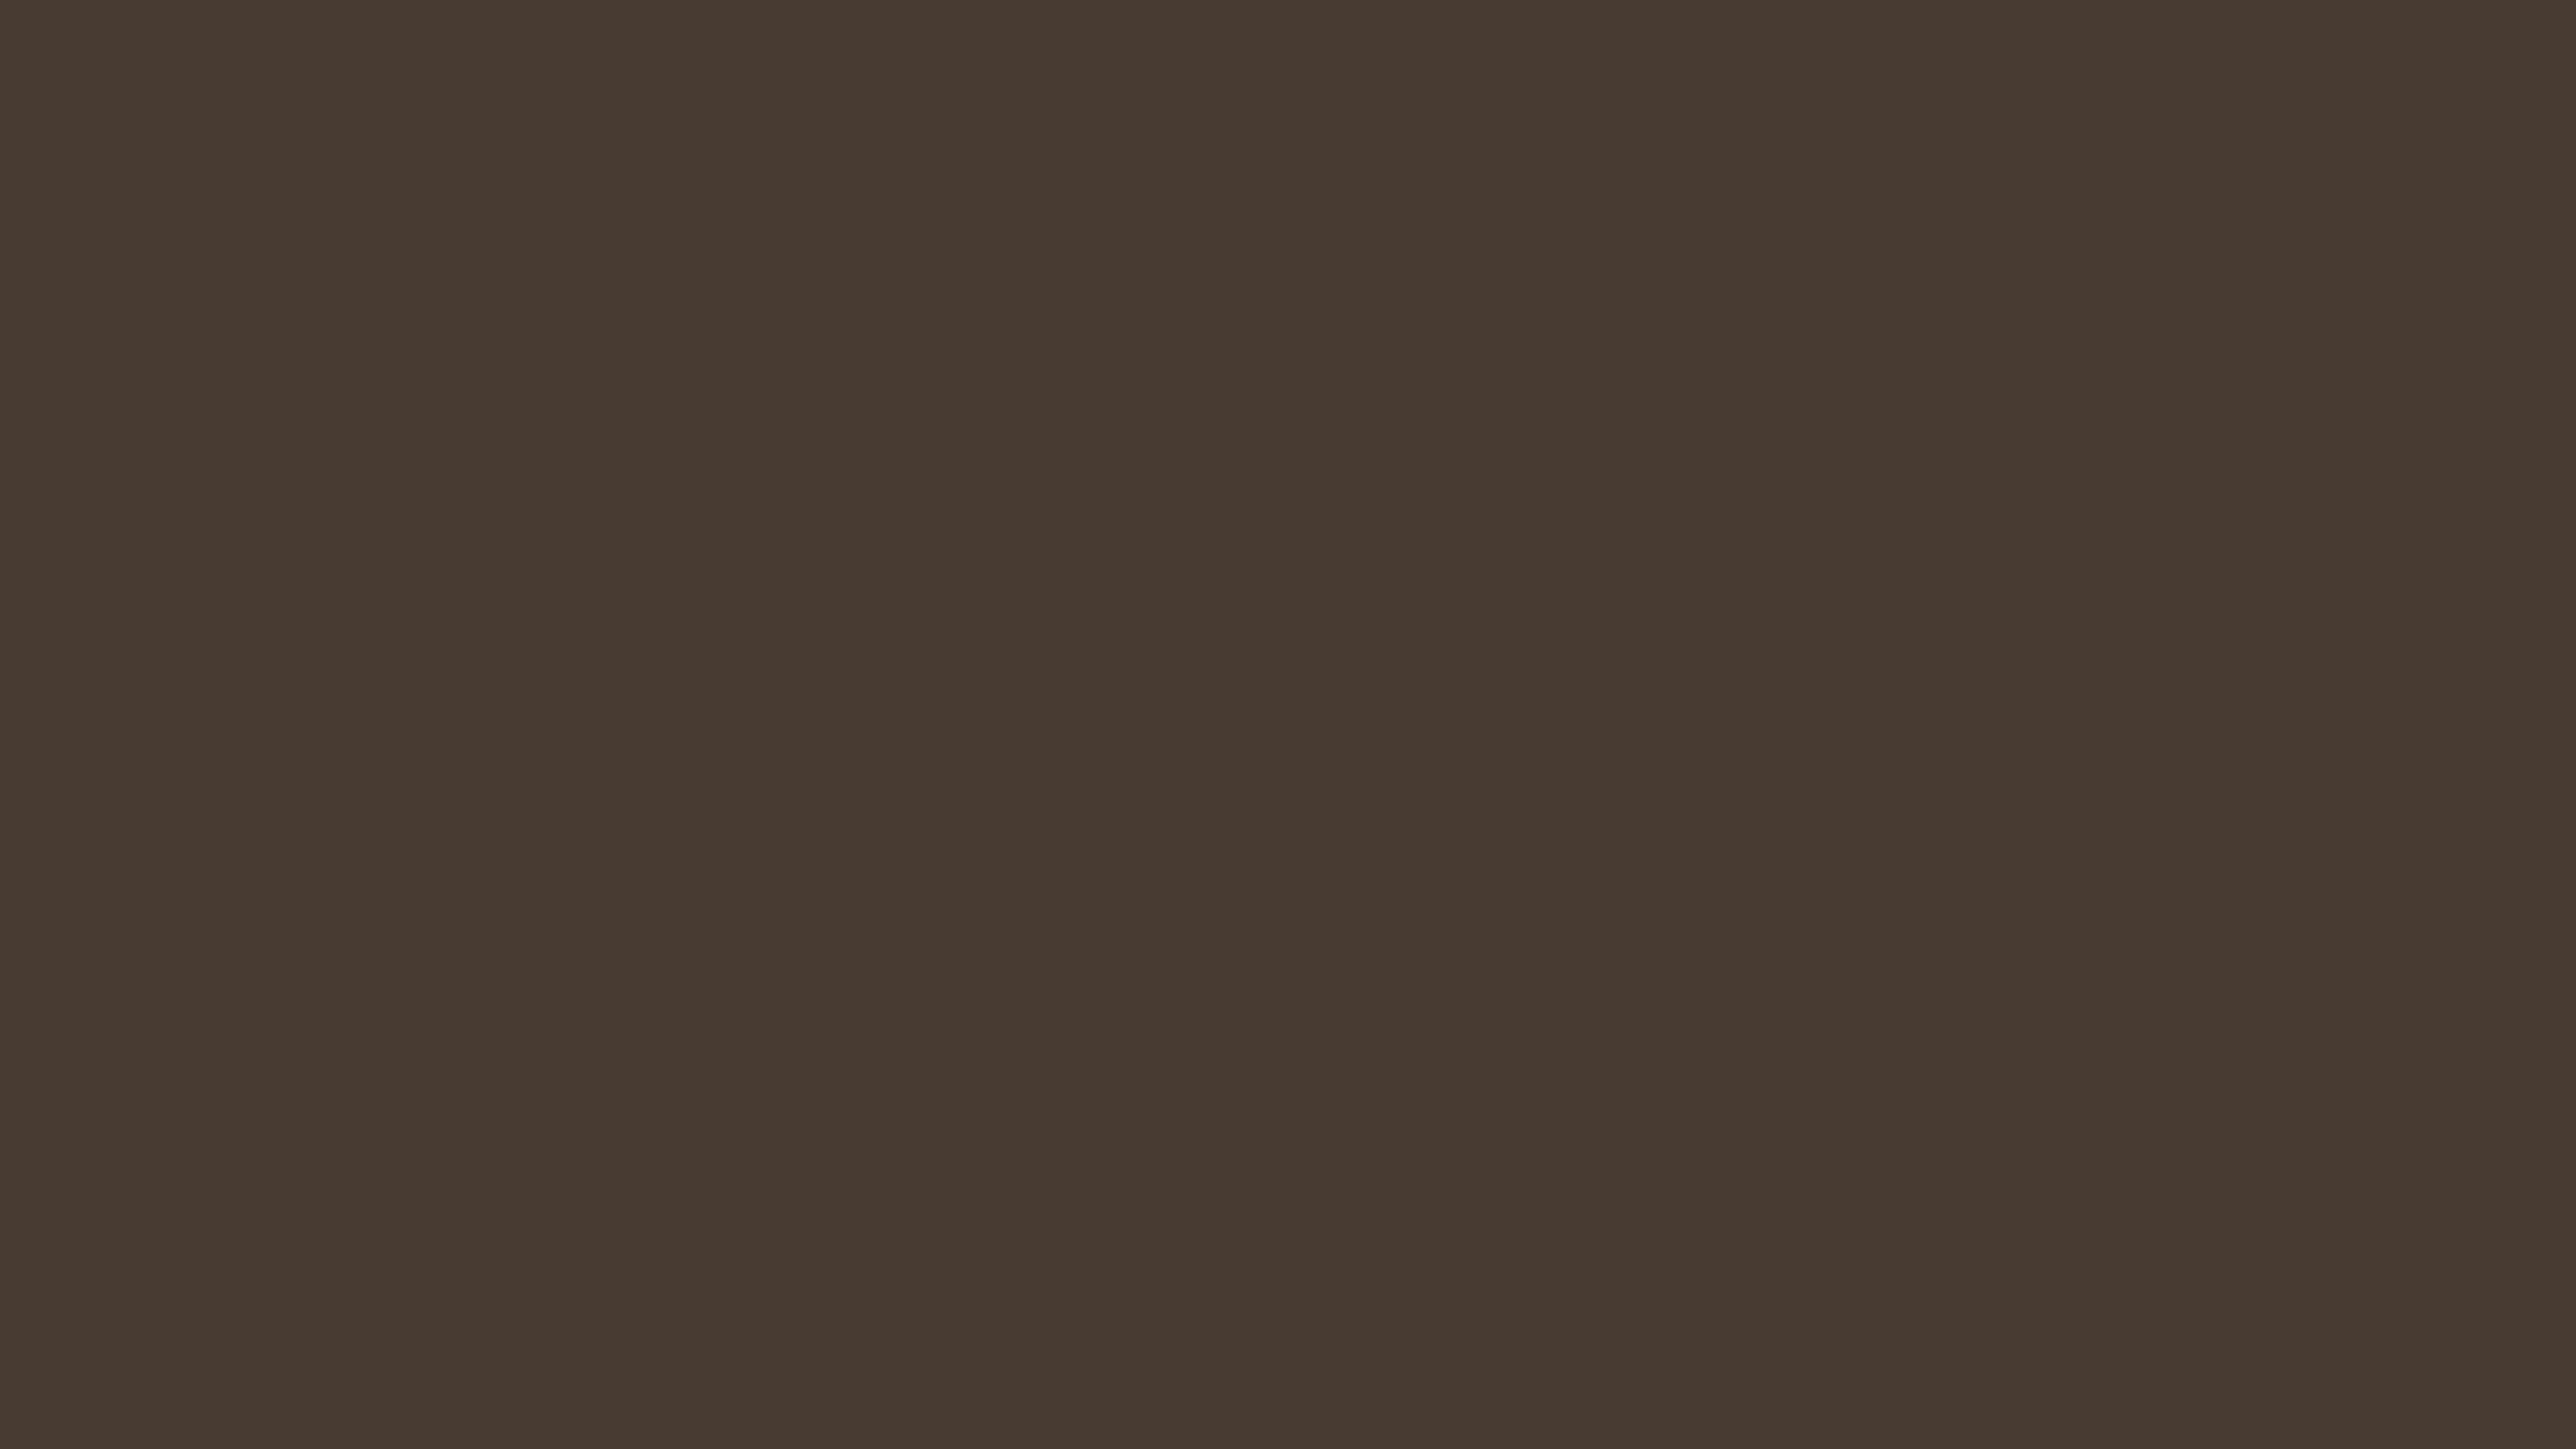 7680x4320 Taupe Solid Color Background